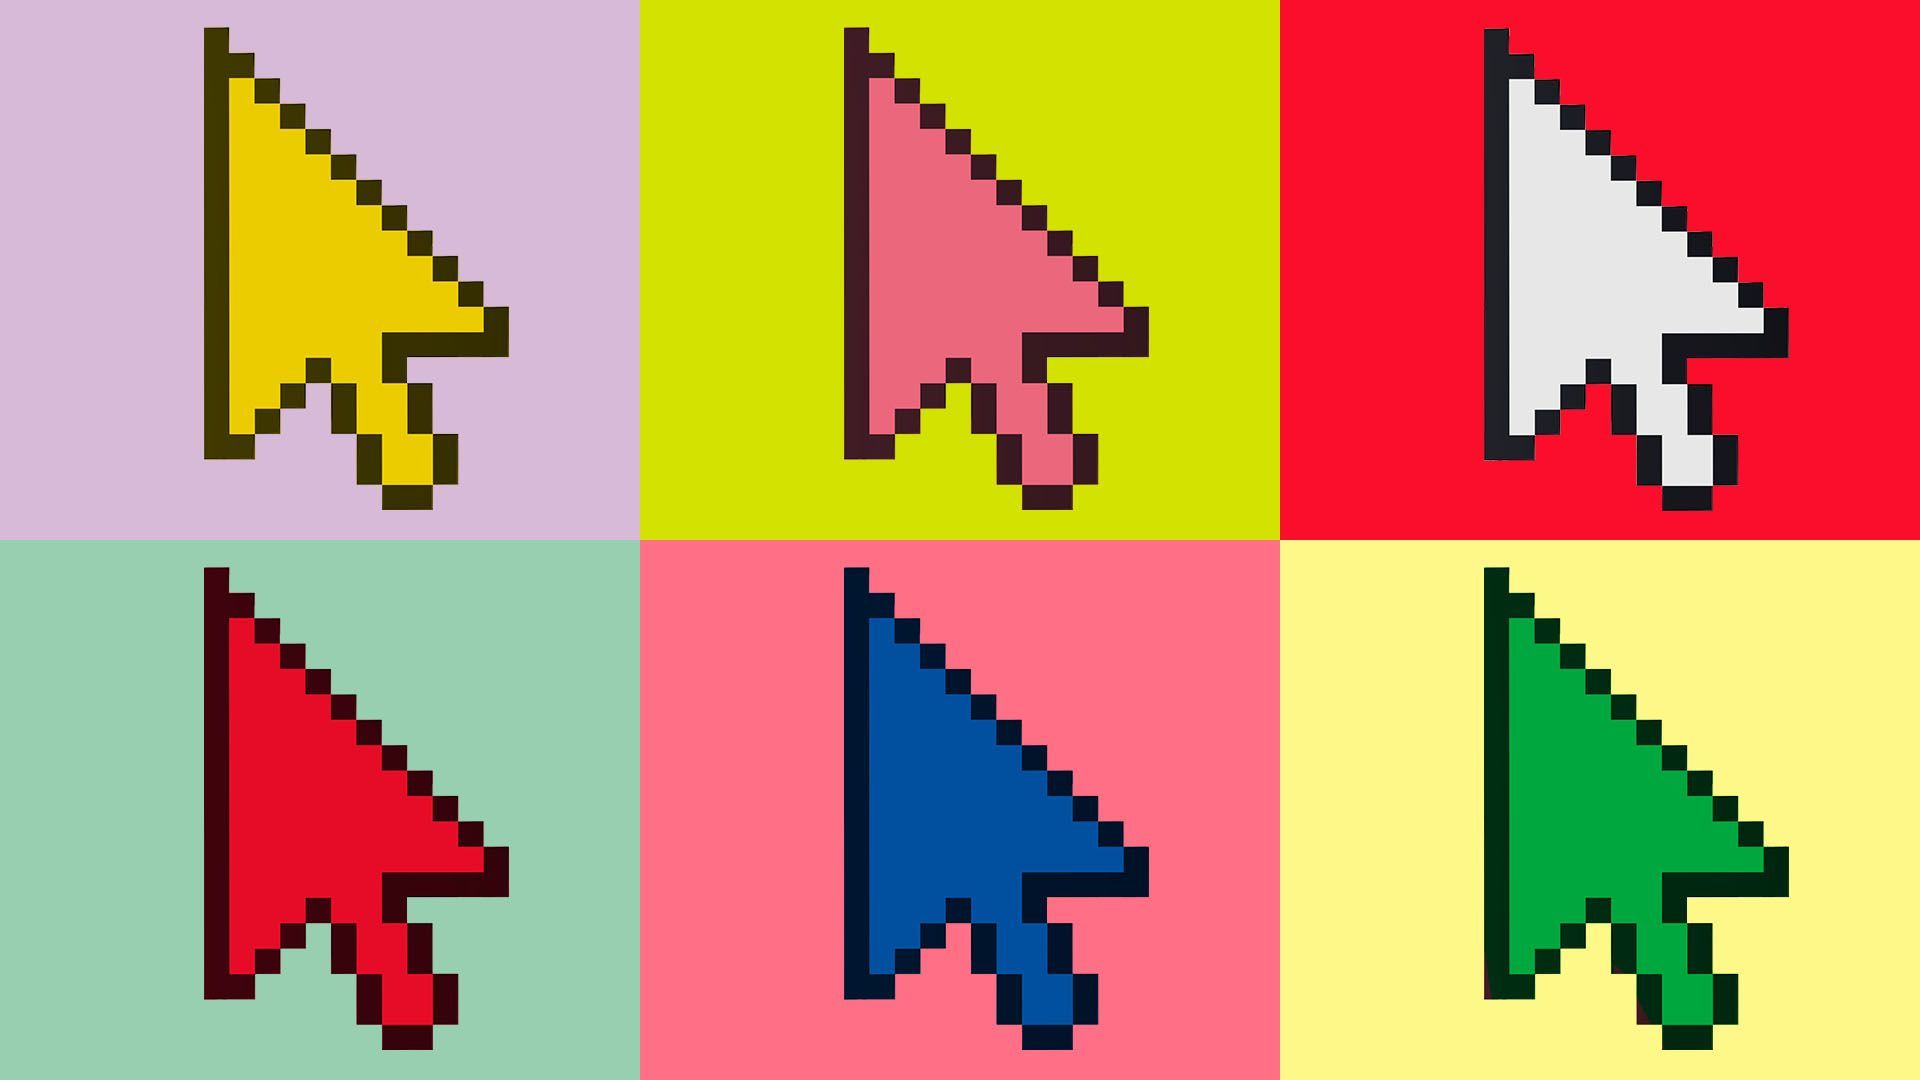 Illustration of a series of cursors rendered as an Andy Warhol style image